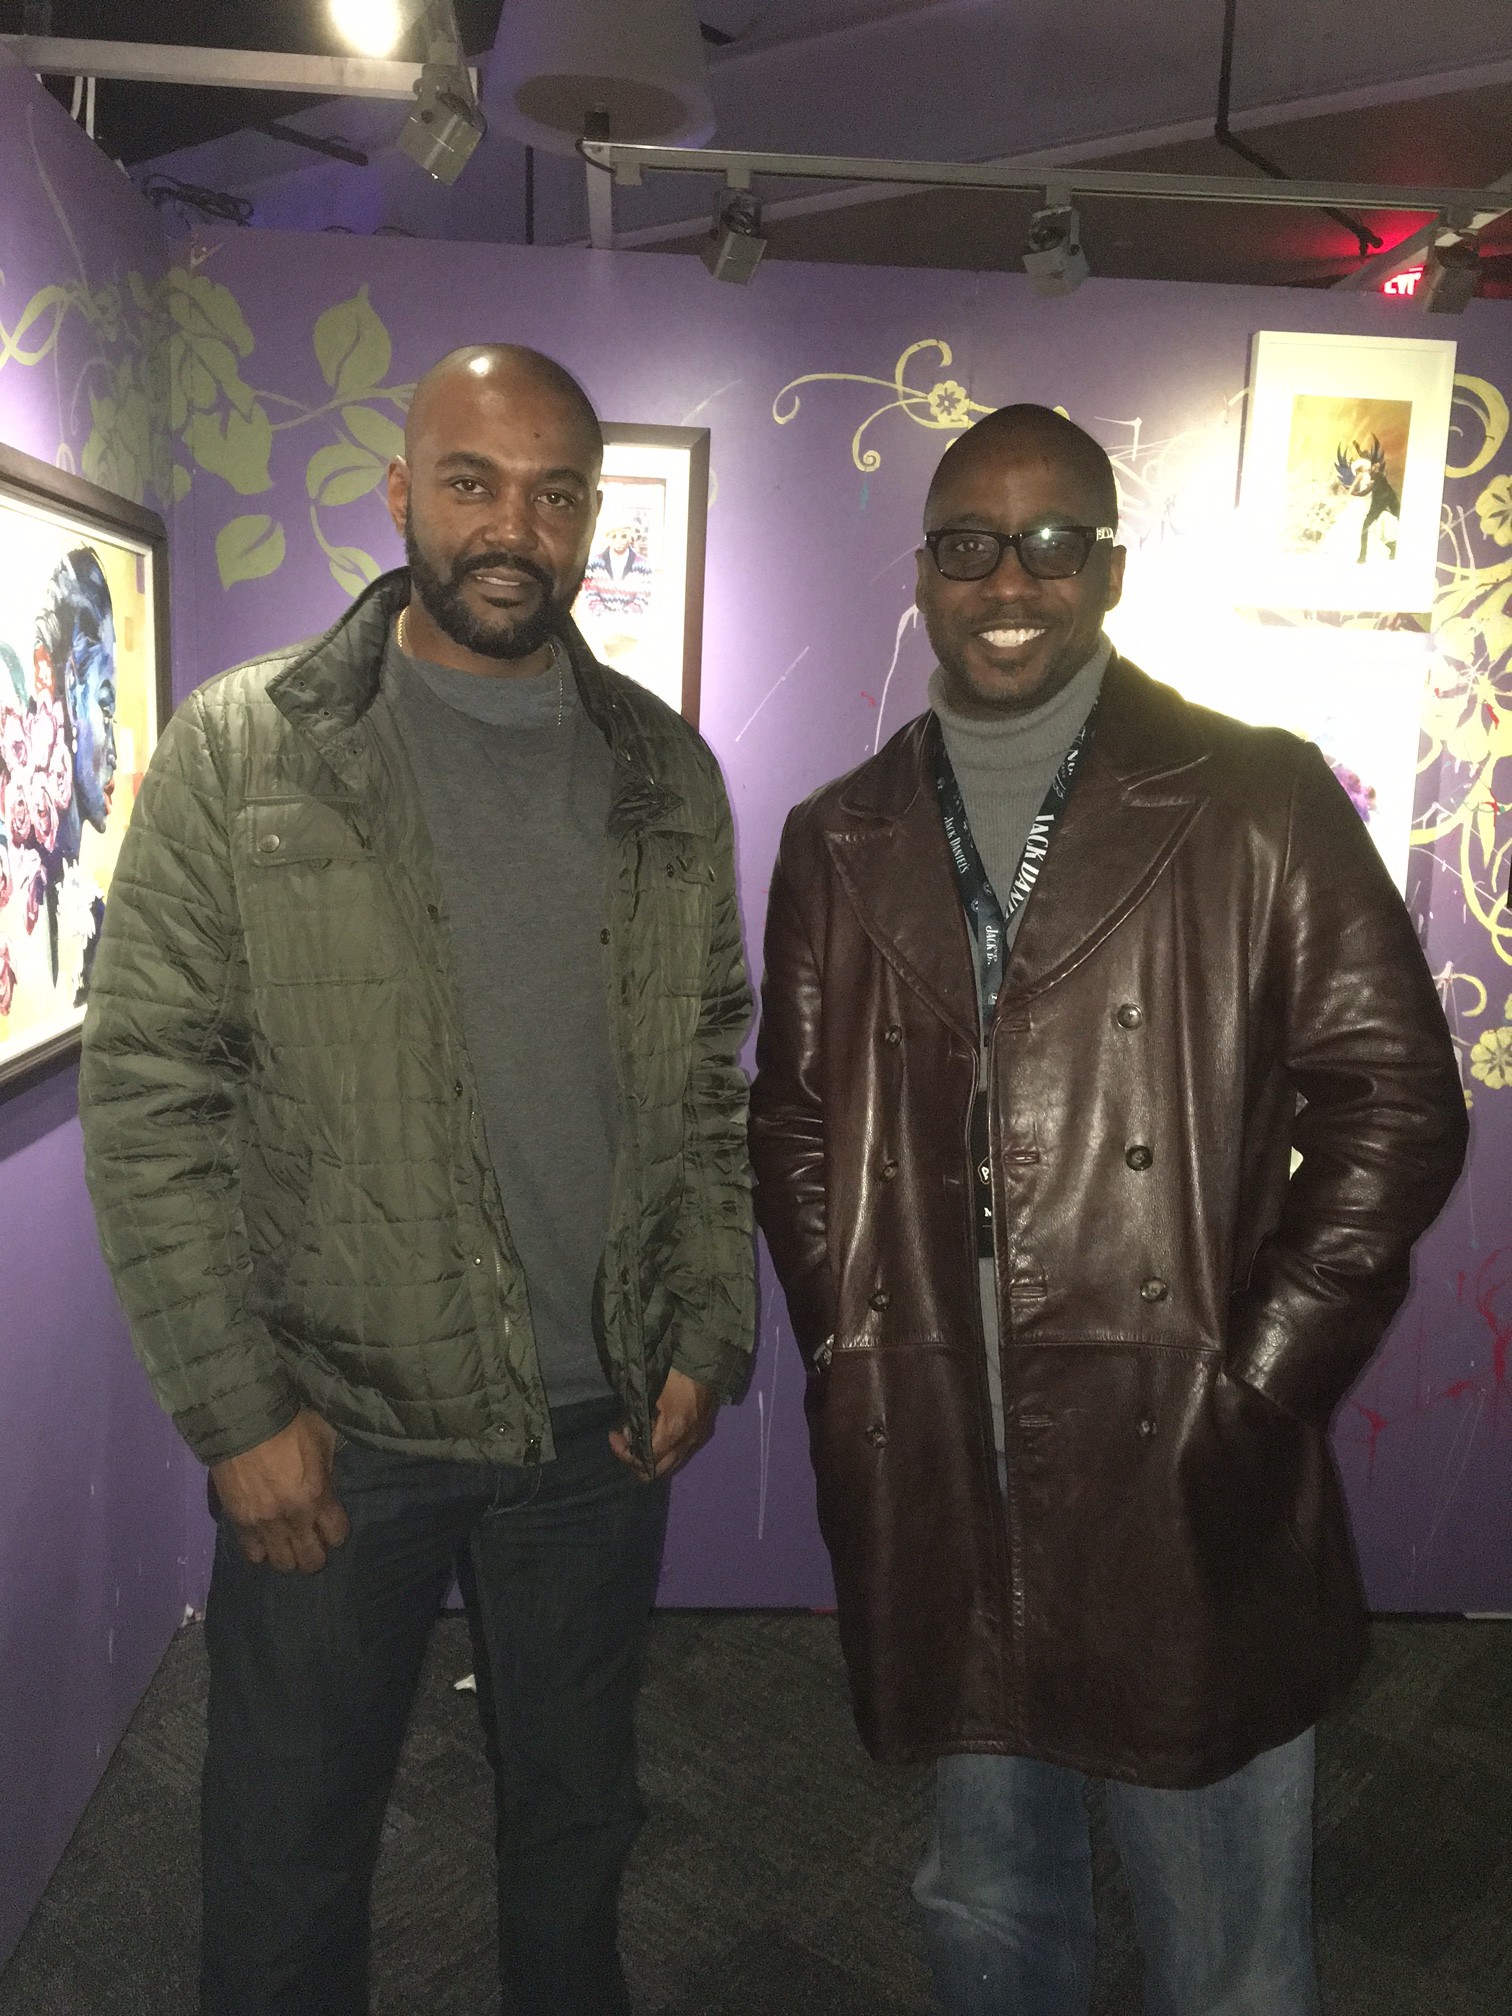 Pictured from left to right: Marcus Shoulders (producer of Triple Set), Christopher Thomas (publishers of inCity Magazine)